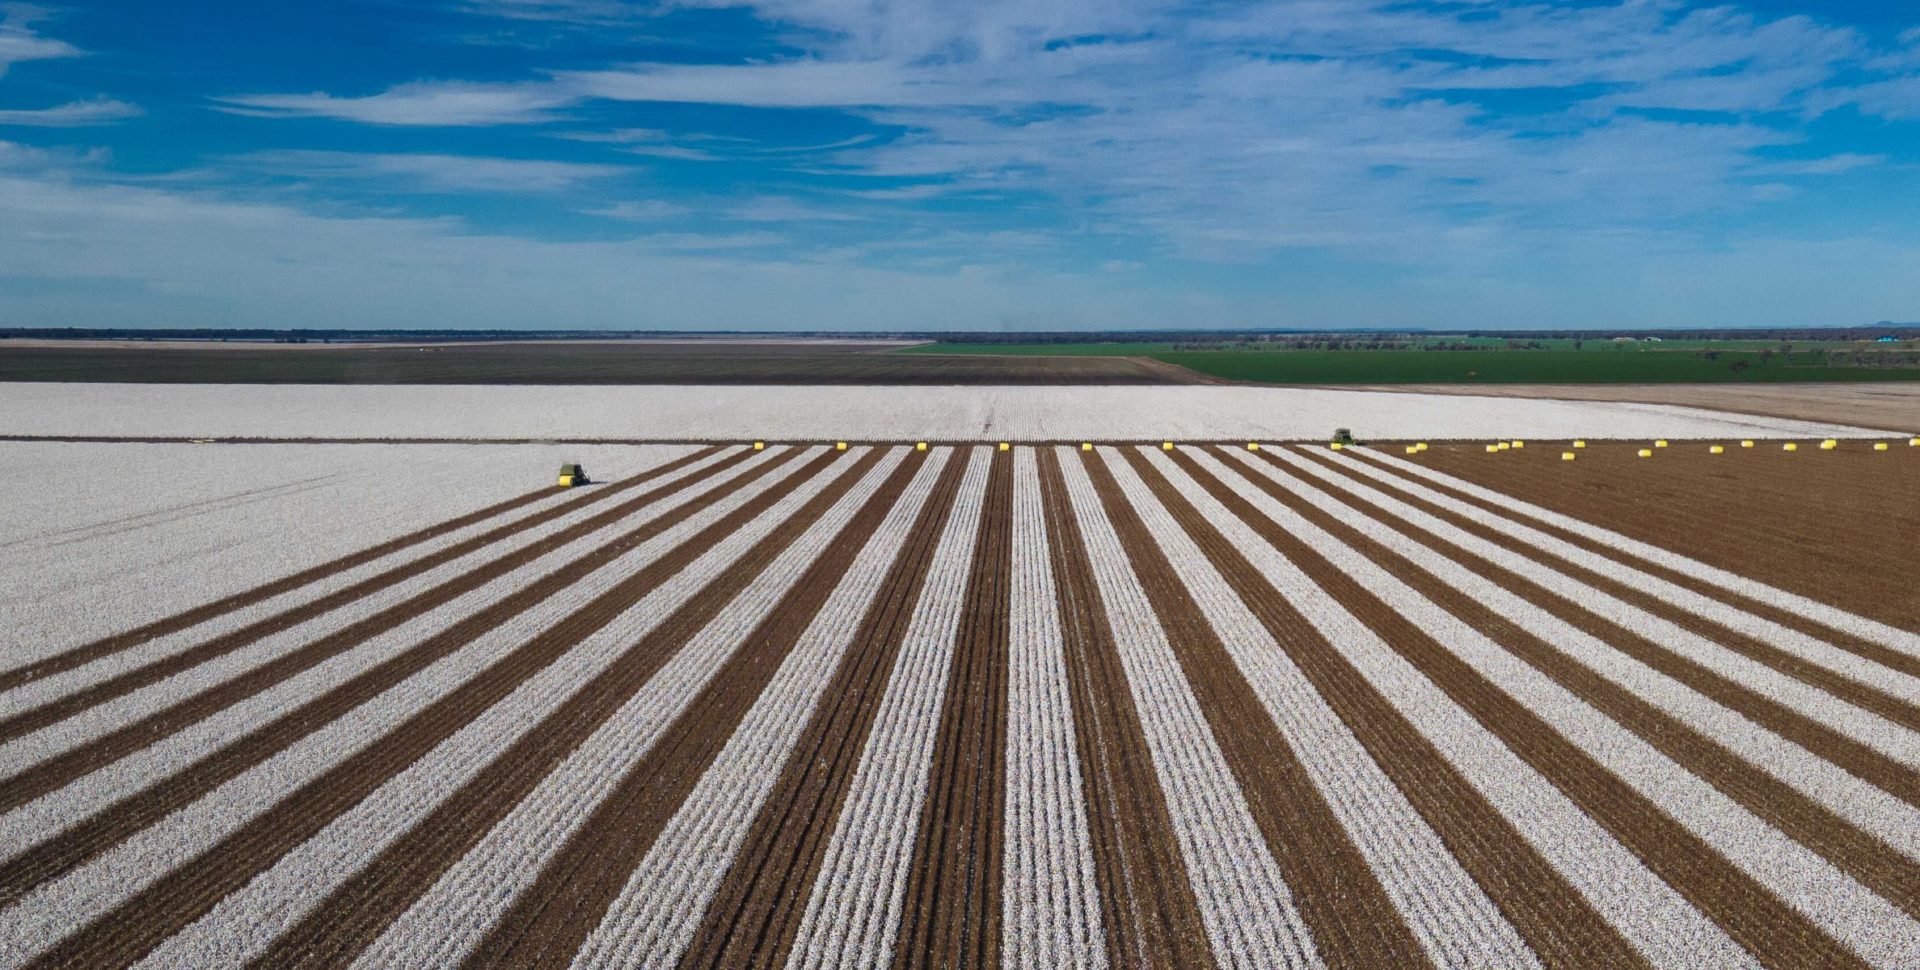 Cotton field being harvested